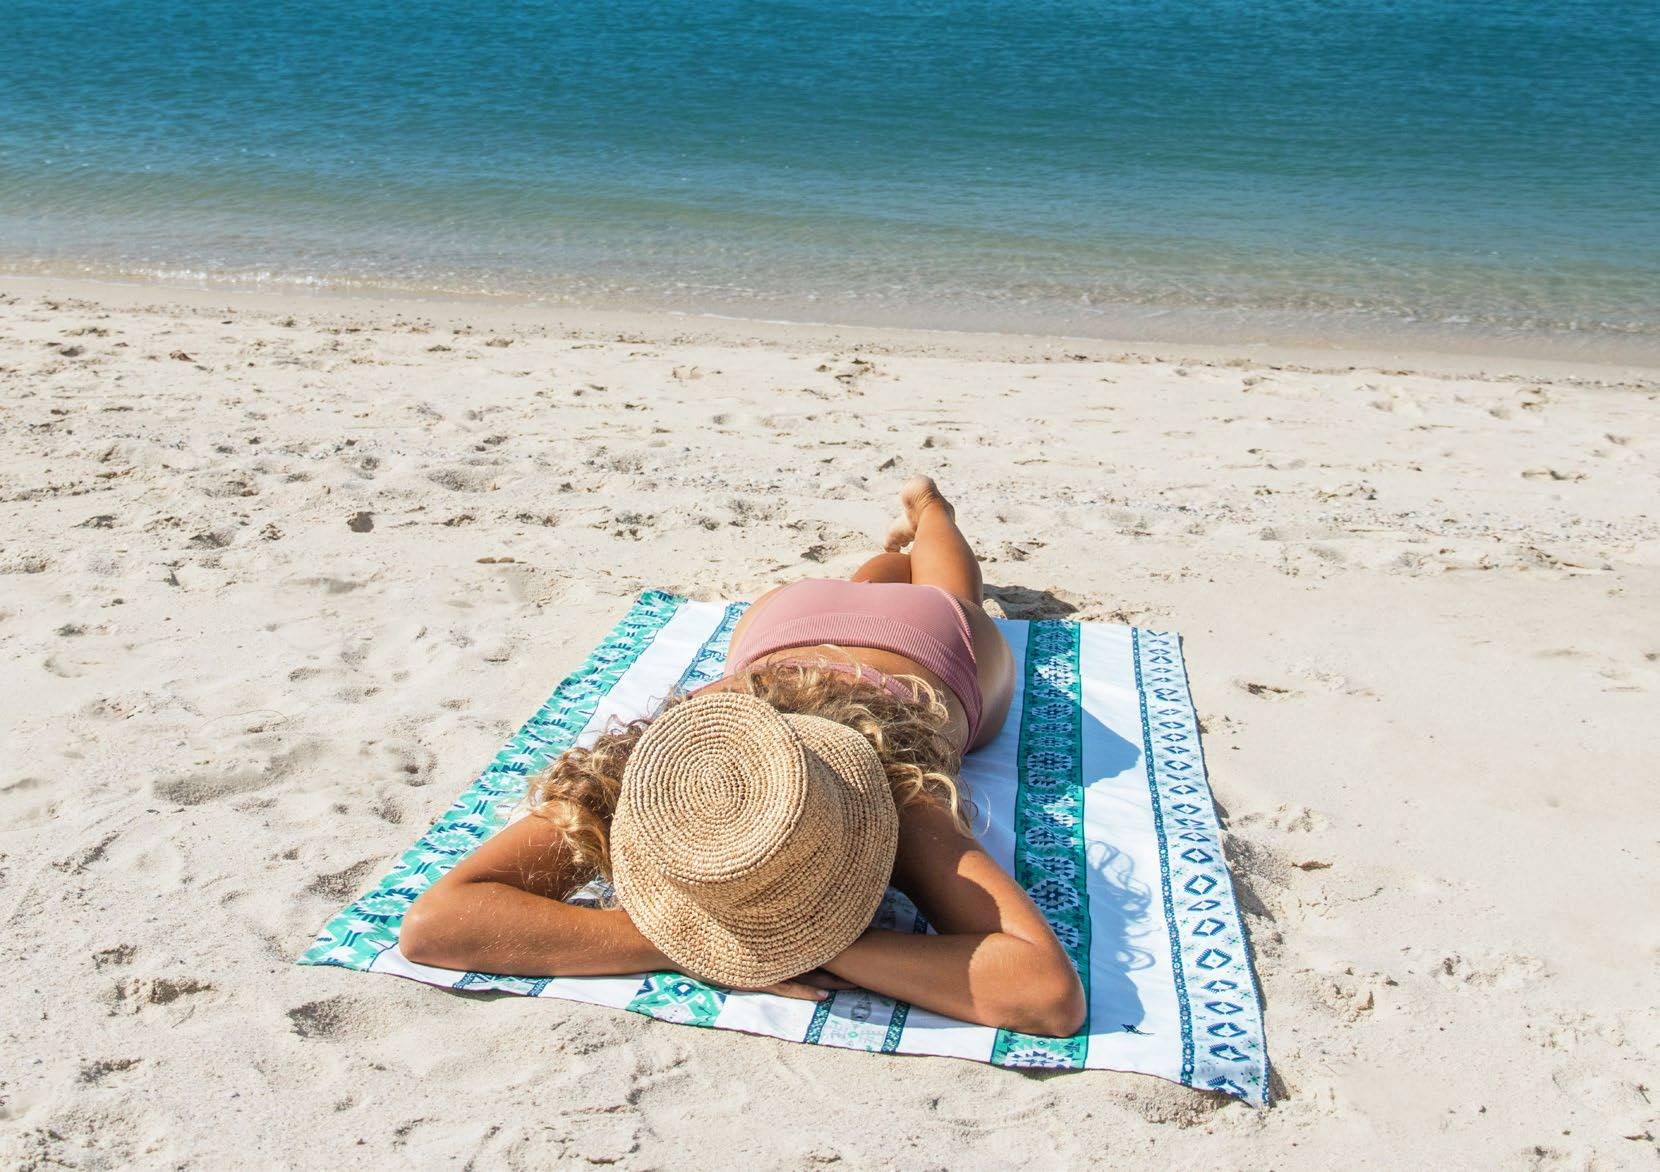 Dock & Bay | Beach Towel Bohemian Collection L 100% Recycled - Upcycle Studio